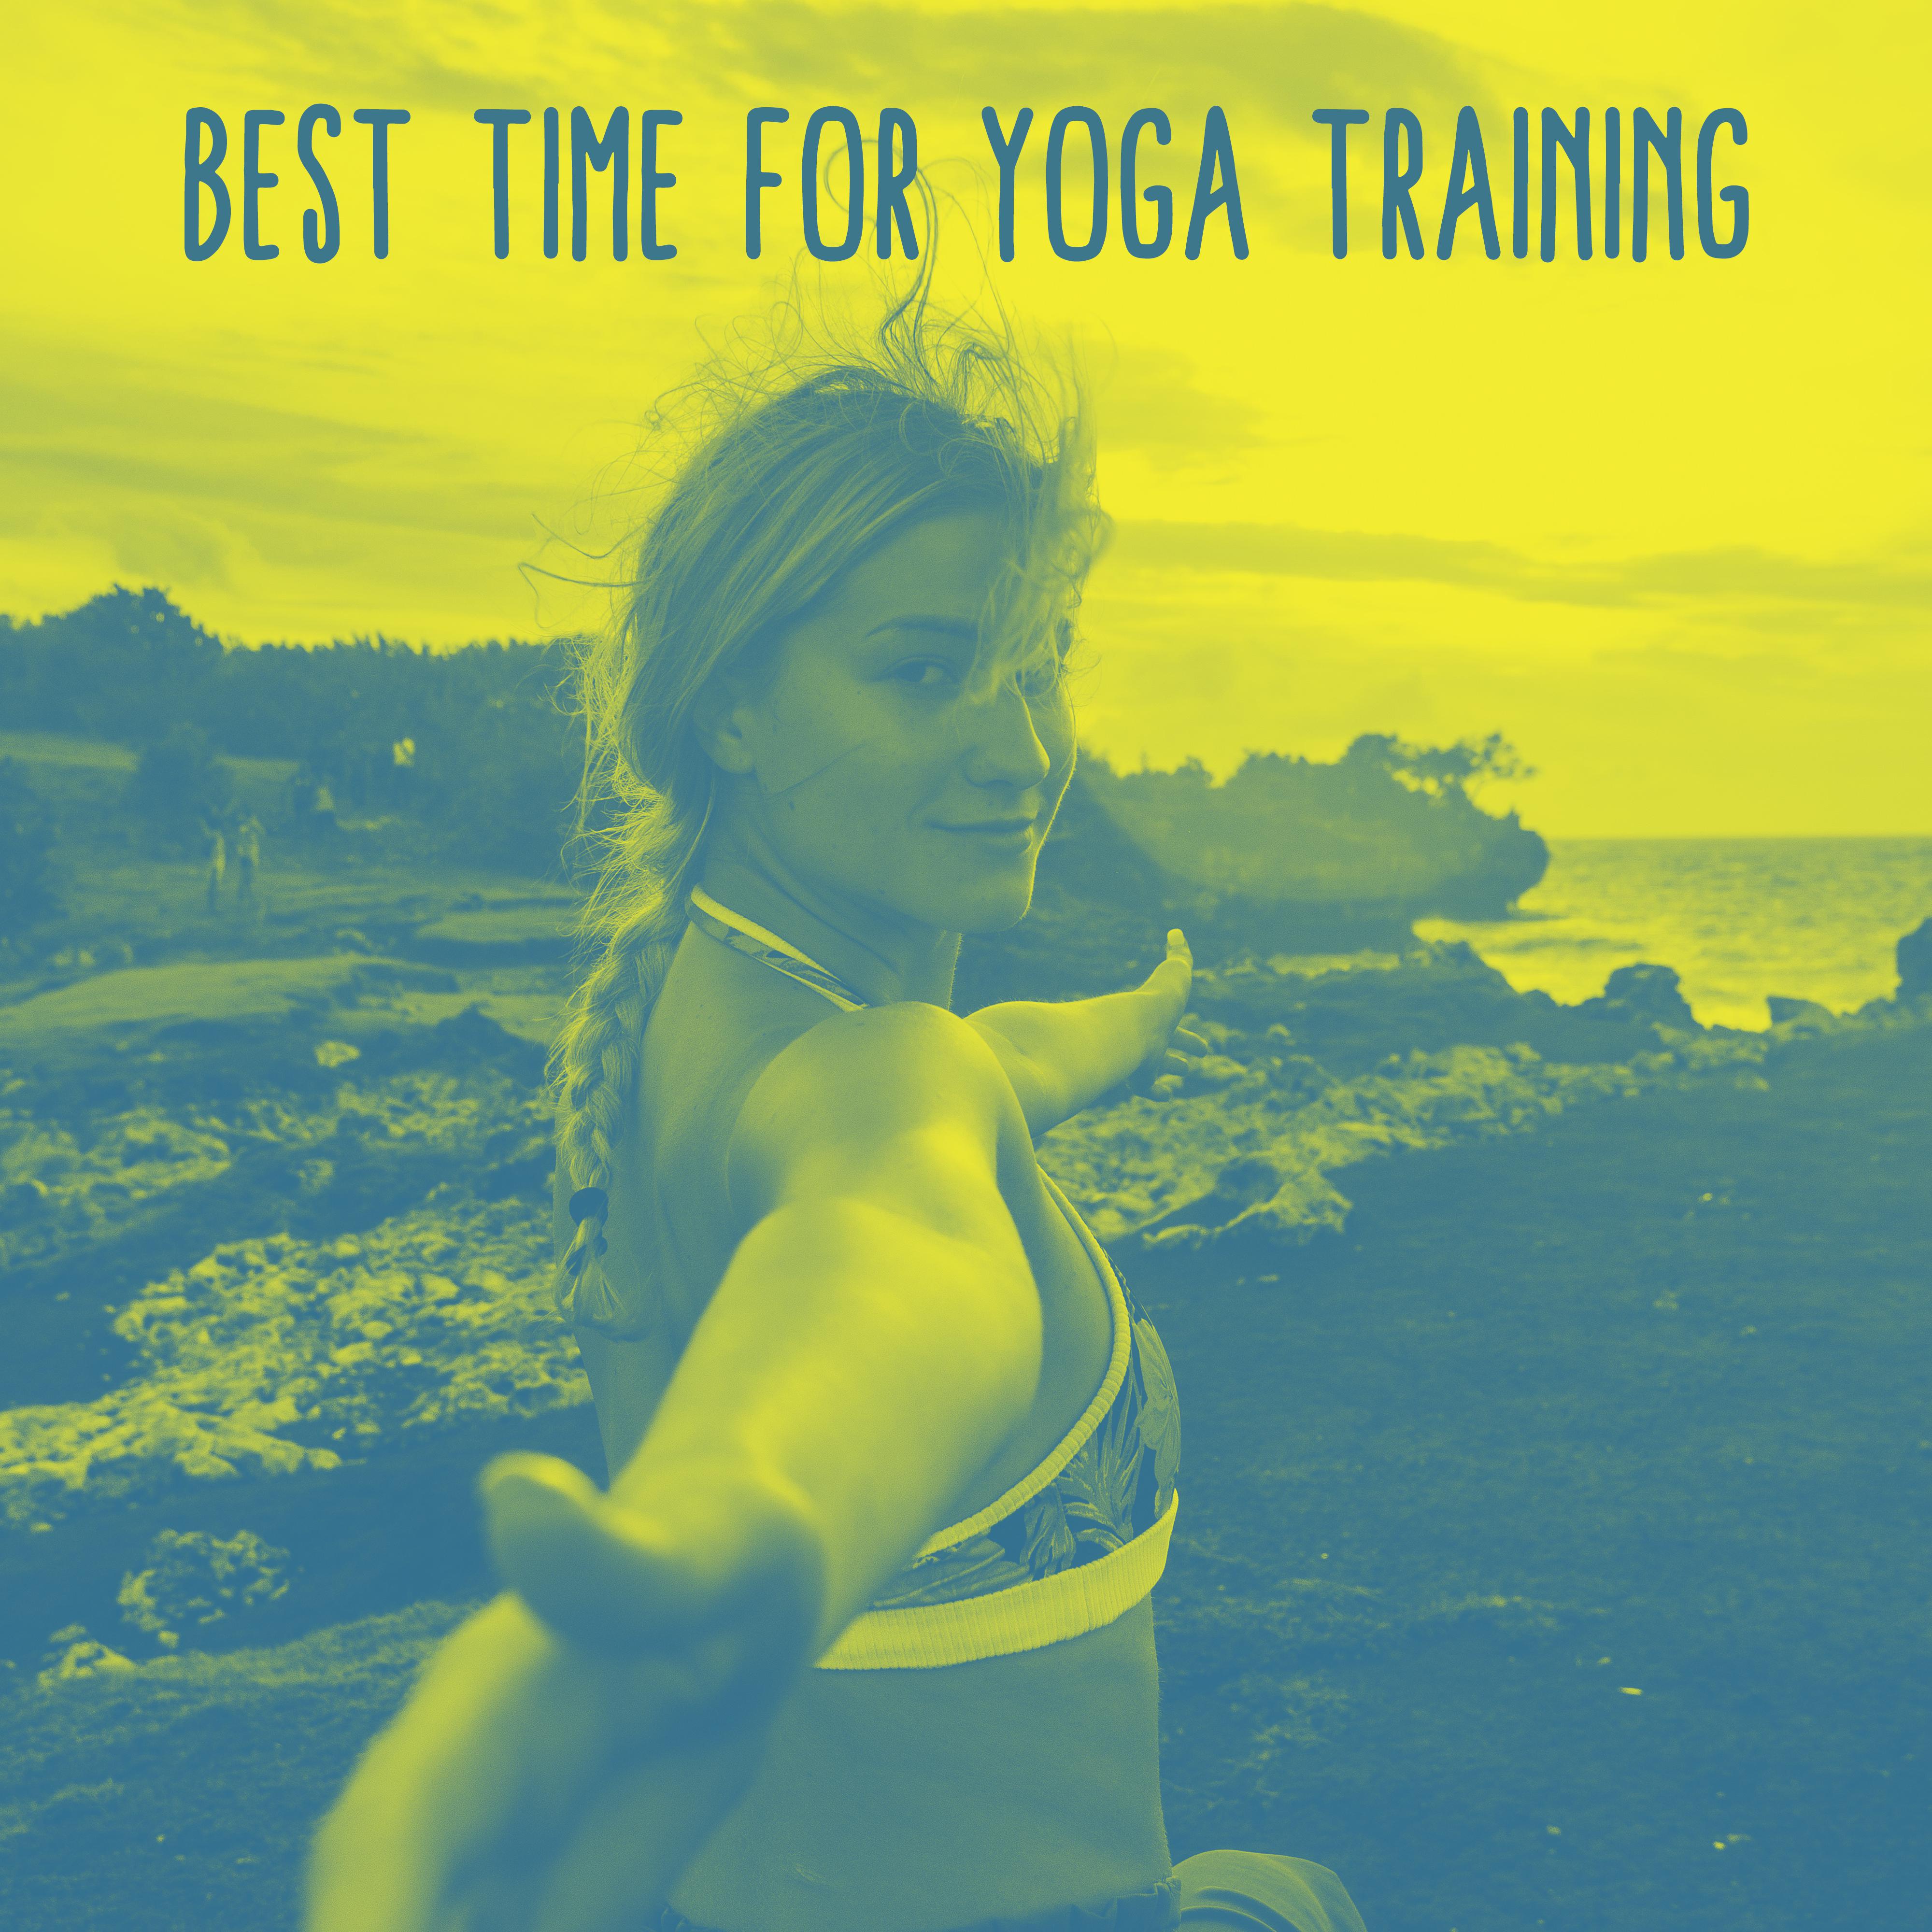 Best Time for Yoga Training: 2019 Compilation of Best New Age Music for Training All Kind of Yoga Poses, Relax Your Body, Clear Your Mind, Zen Meditation, Improve Inner Strength